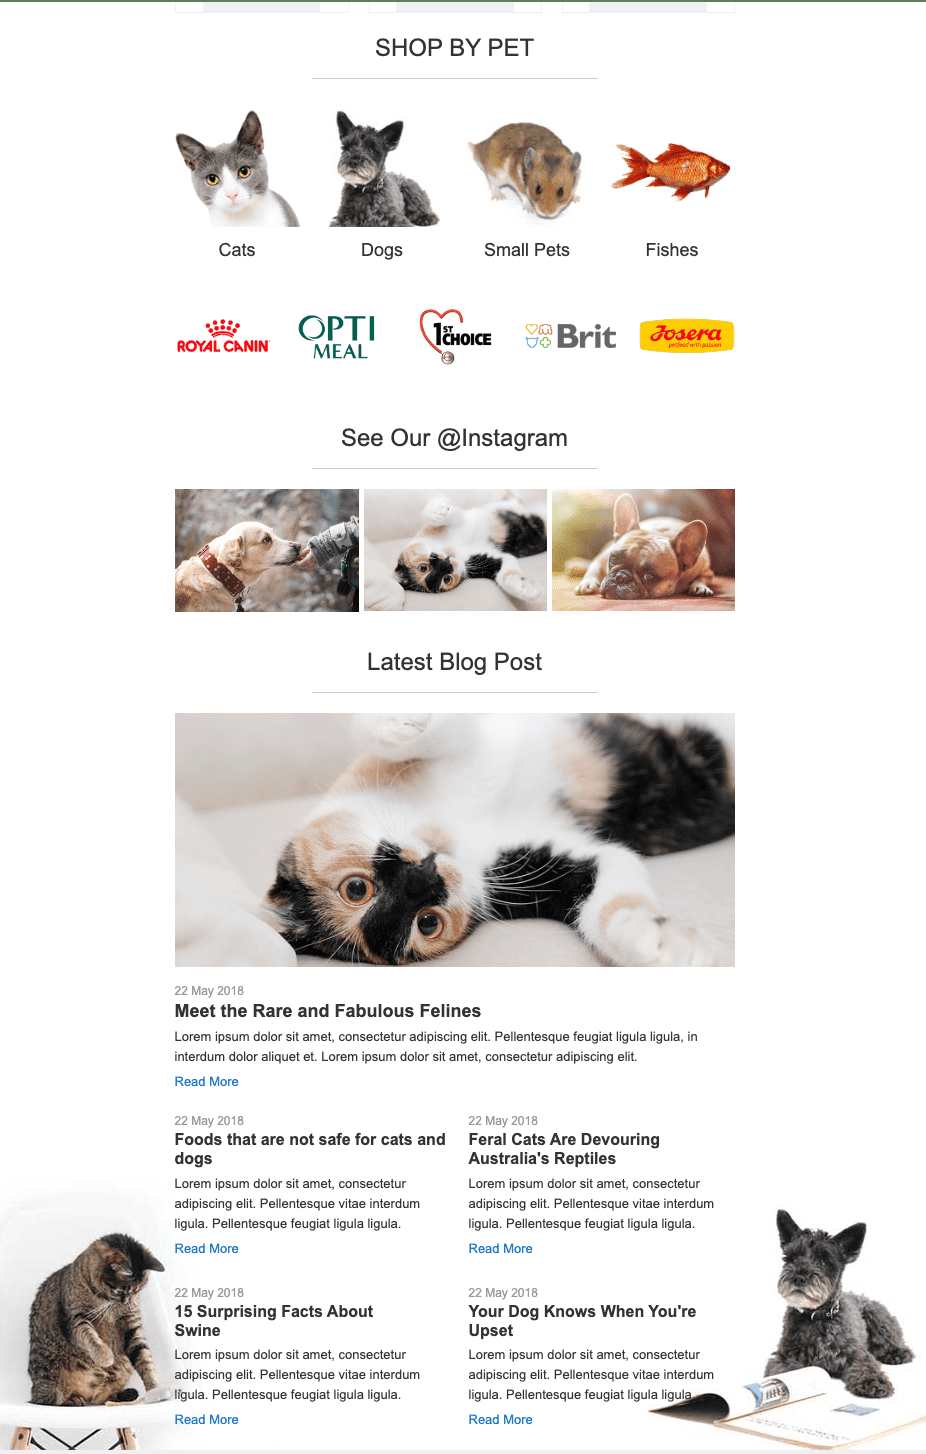 Creative email with marketing materials on kittens and other animals